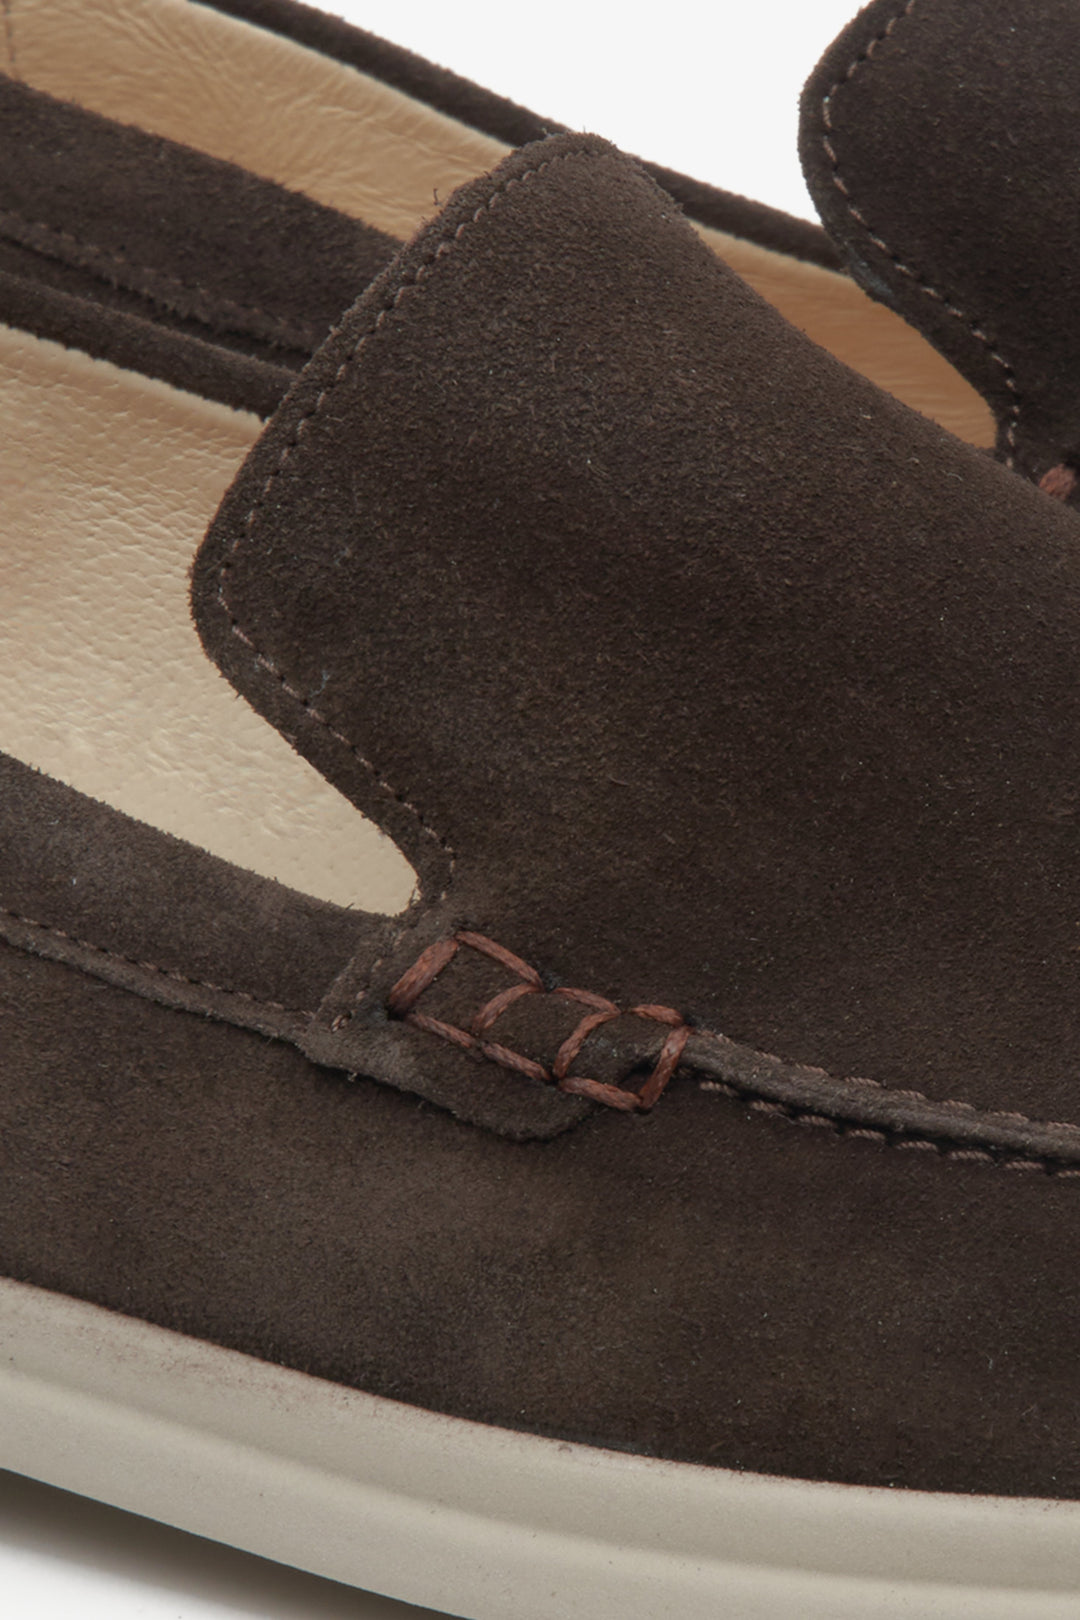 Estro men's natural velvet loafers in saddle brown - close-up of the heel and sideline of the shoes.